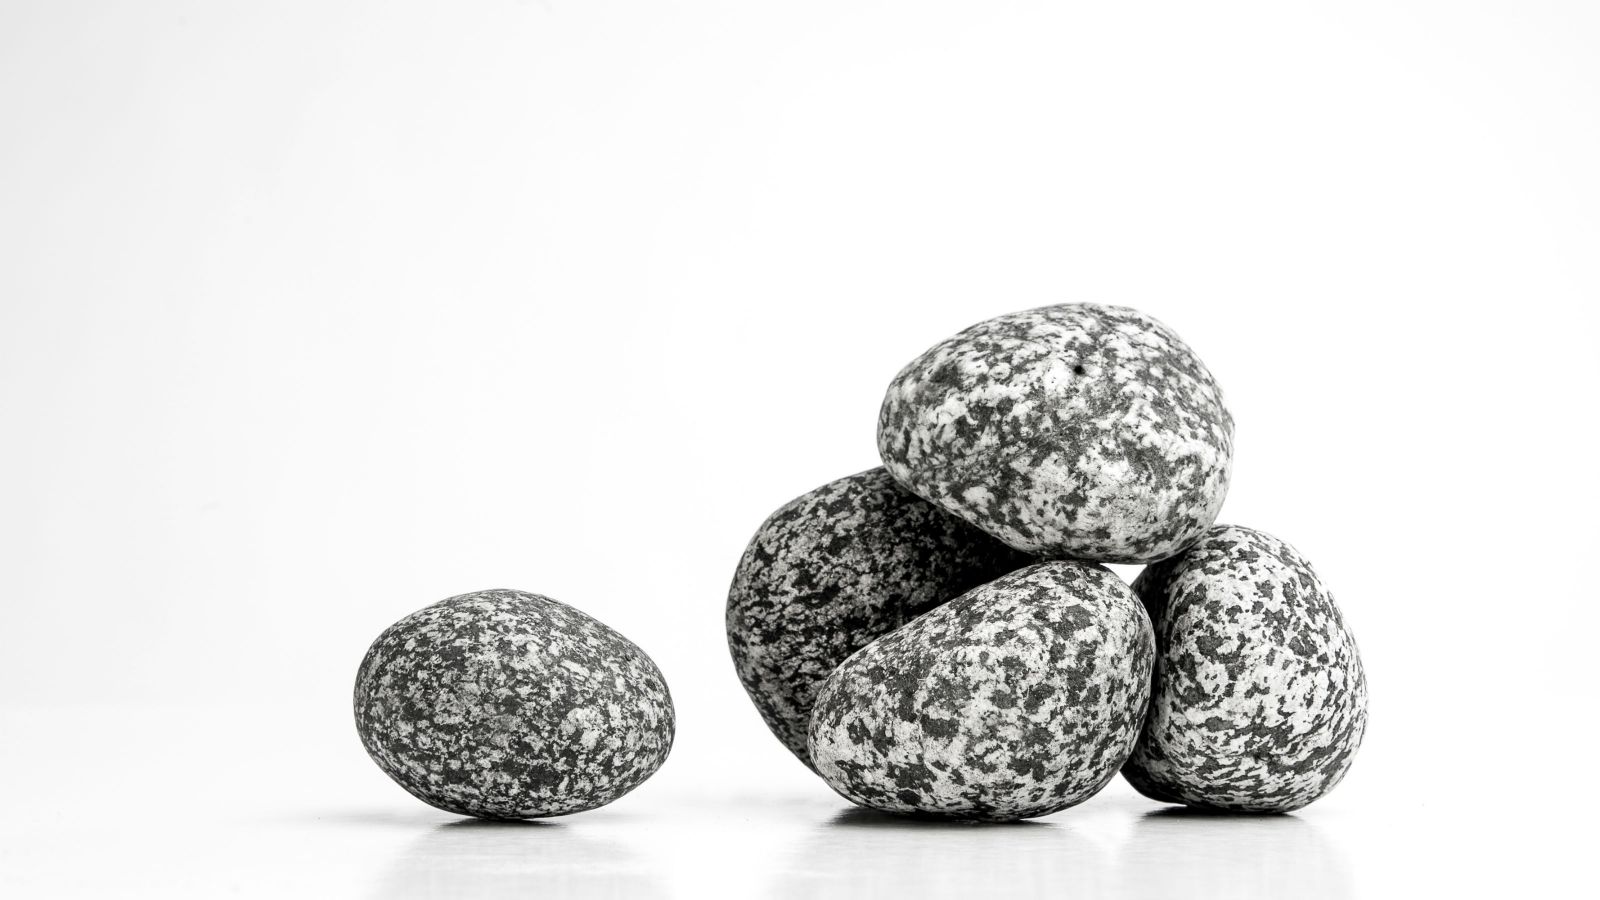 A small pile of grey stones against a white background.